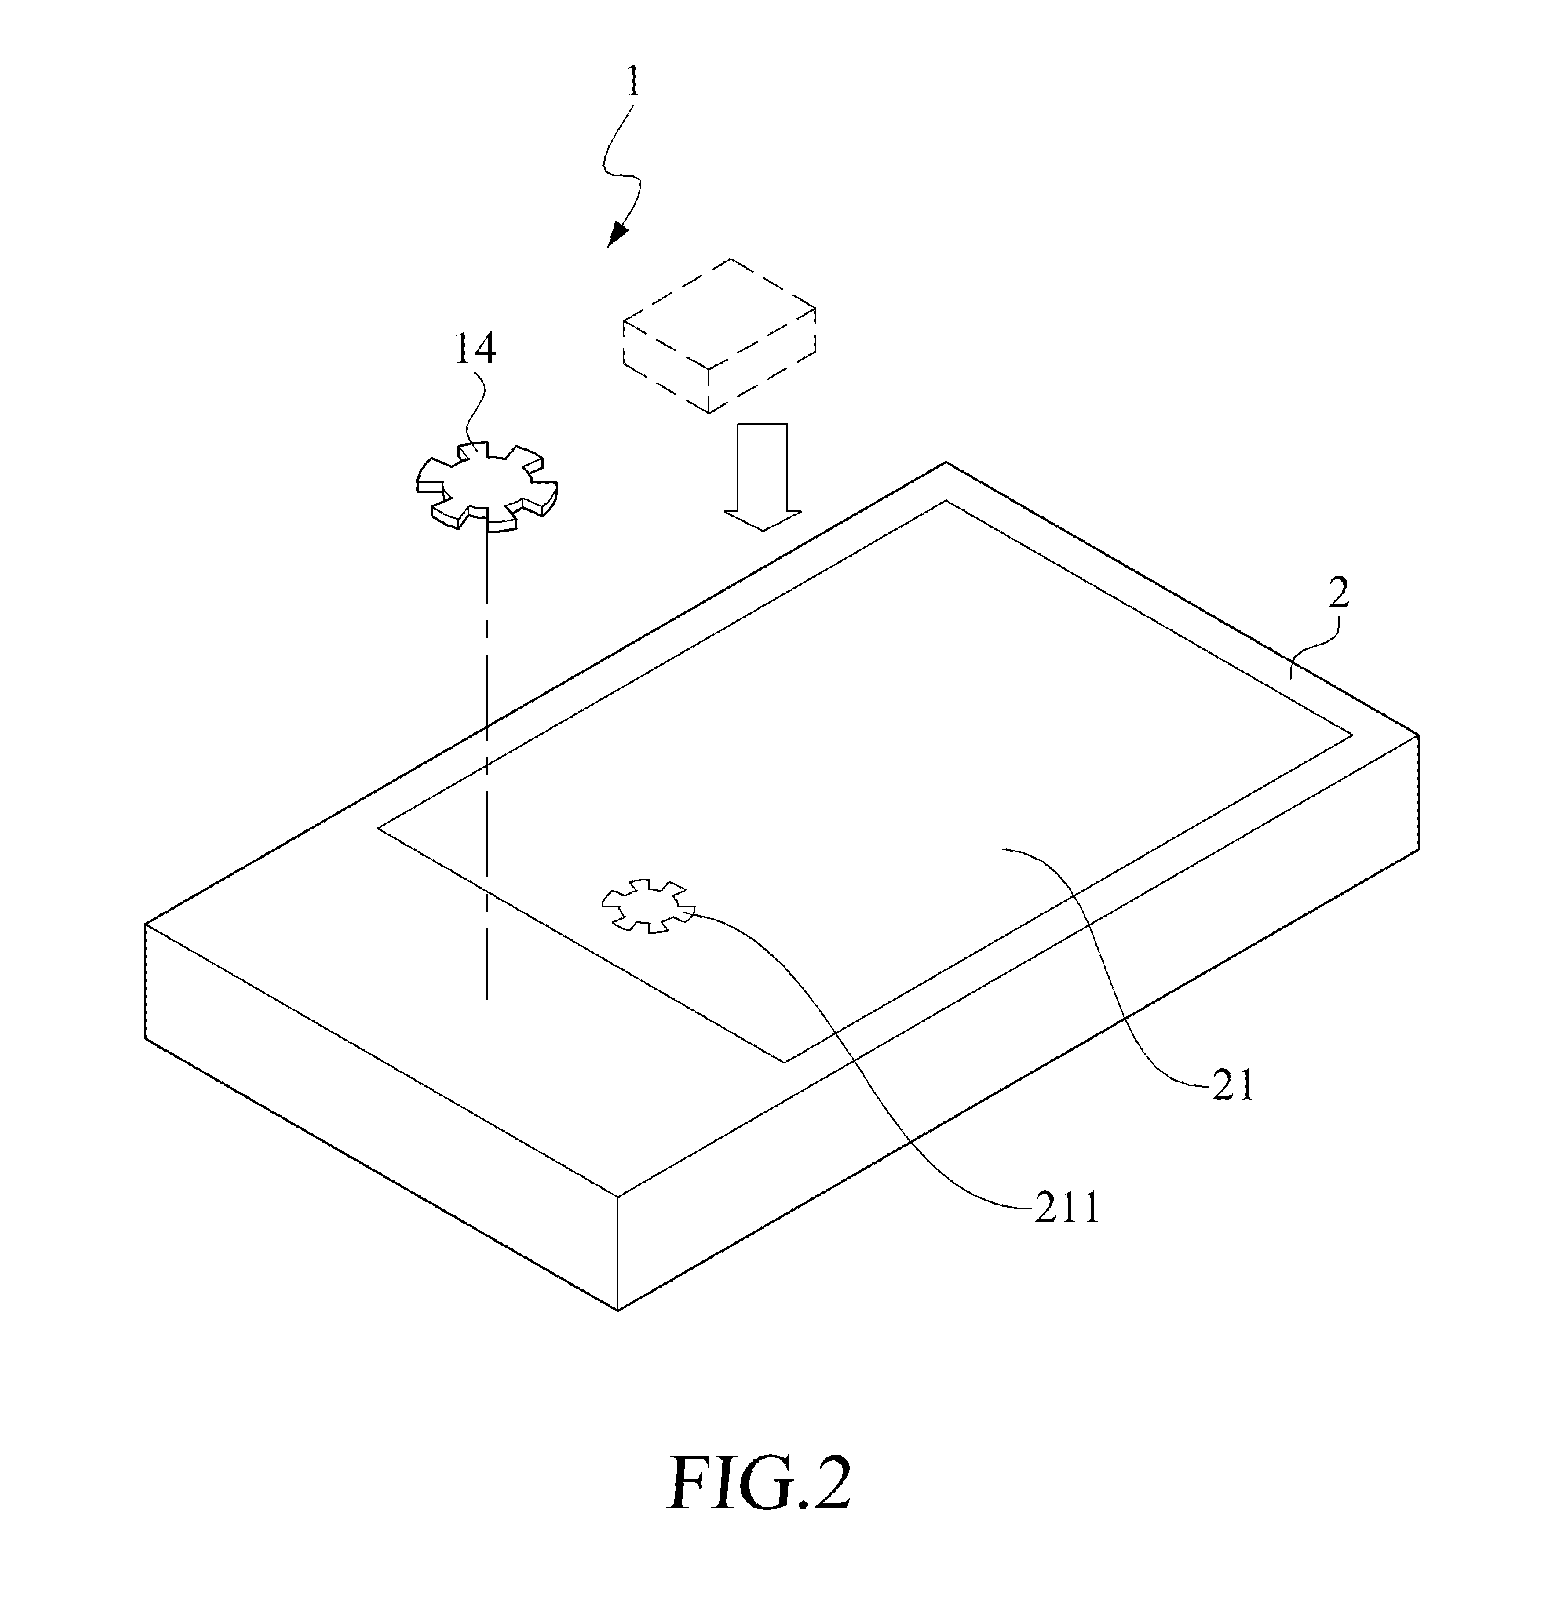 Method of controlling mobile device with touch-sensitive display and motion sensor, and mobile device